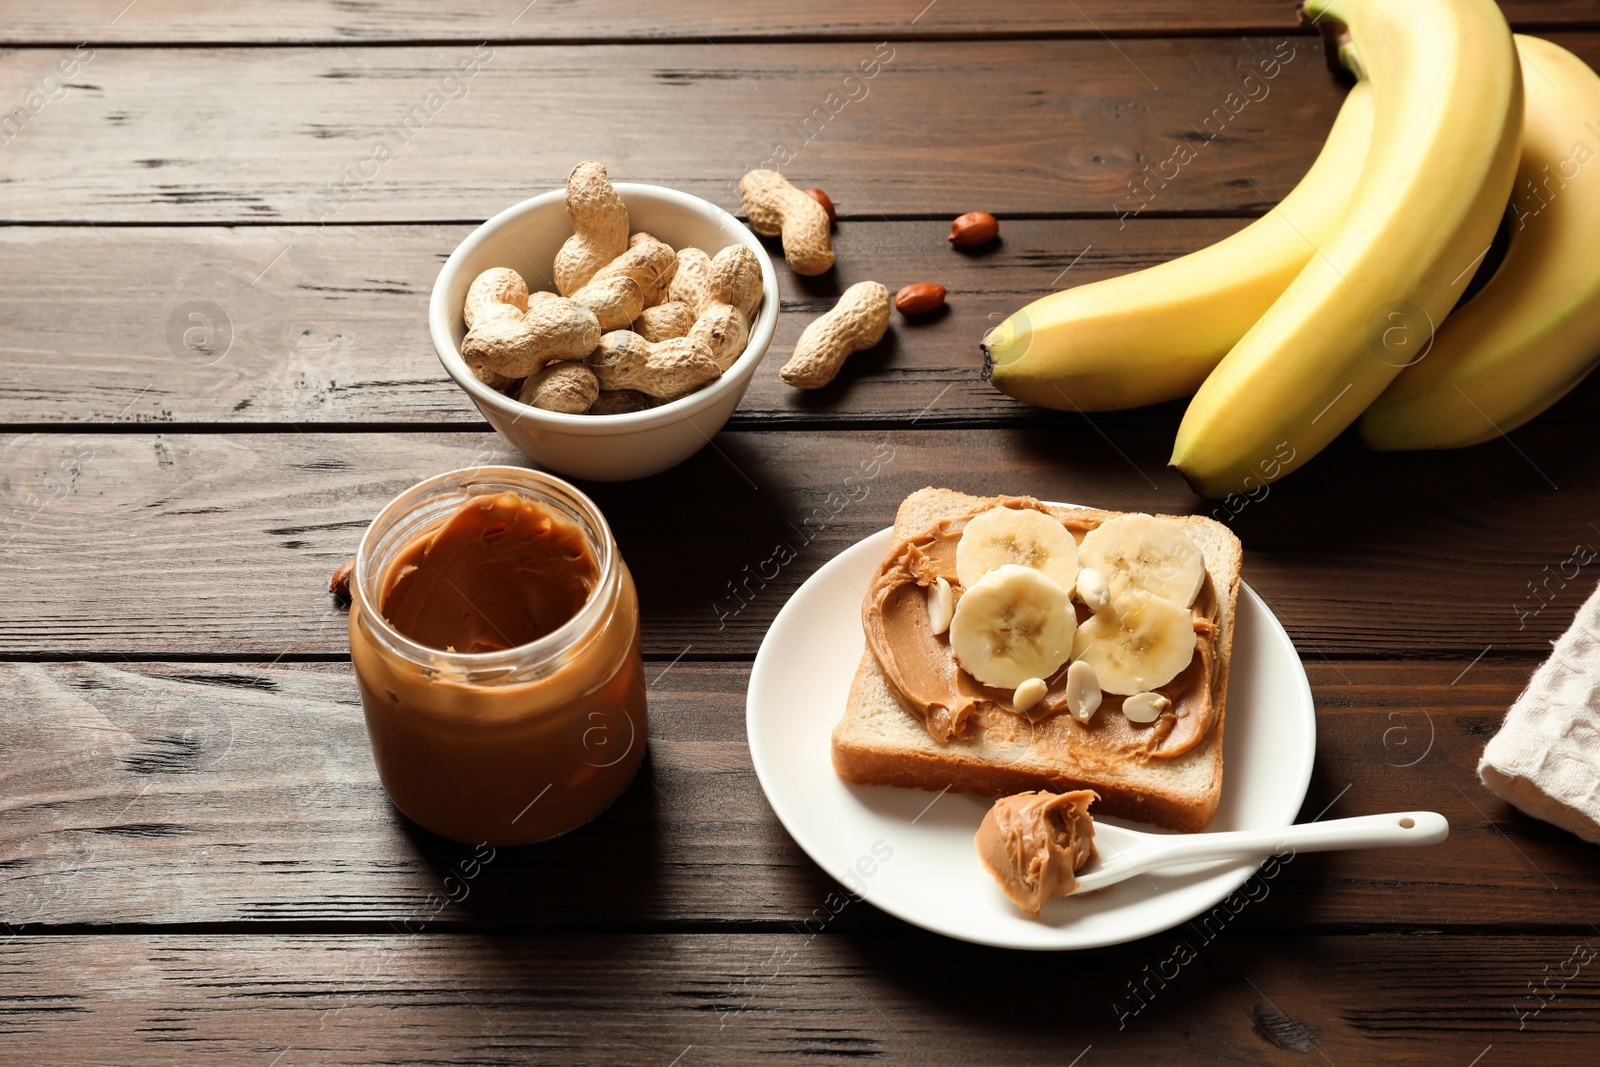 Photo of Toast bread with peanut butter and banana slices on wooden table